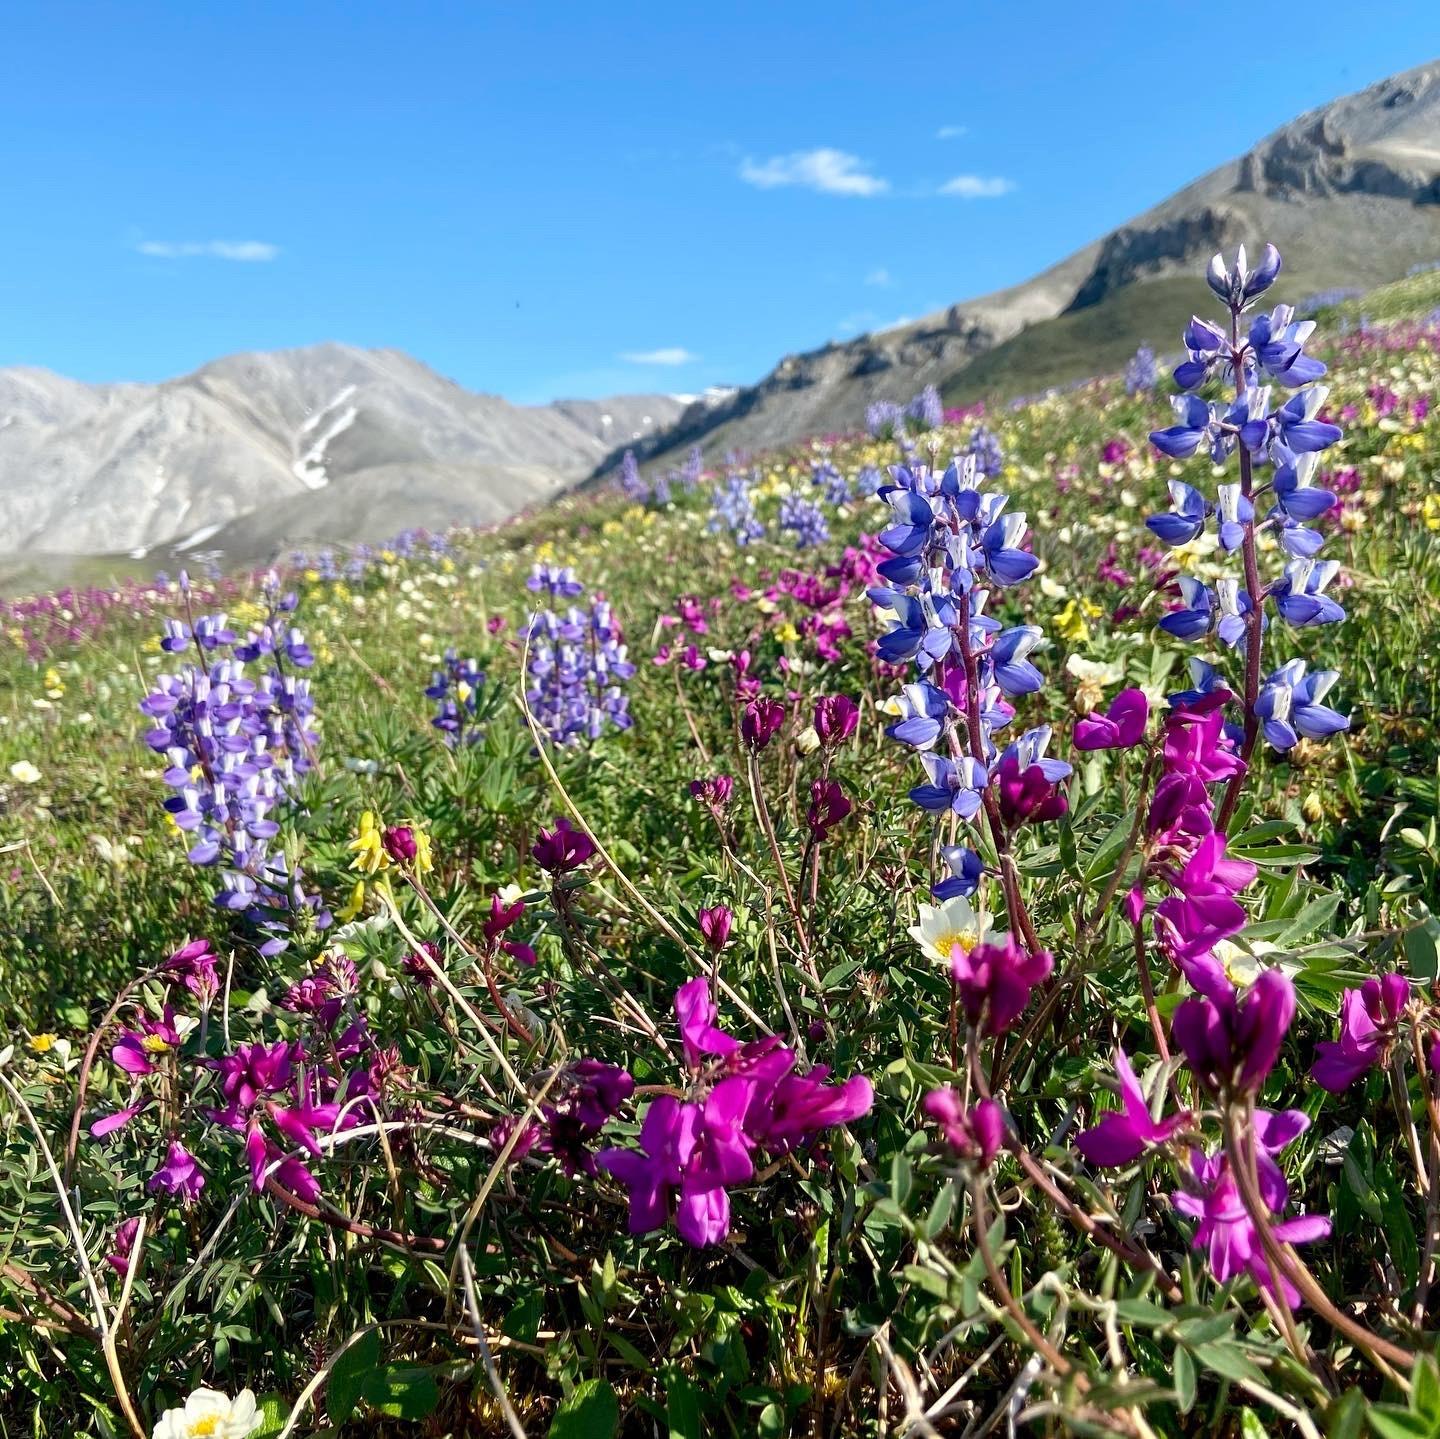 Arctic Refuge awe blooms in shades of purple and yellow in close-up wildlflowers on a hill leading up to mountains. 